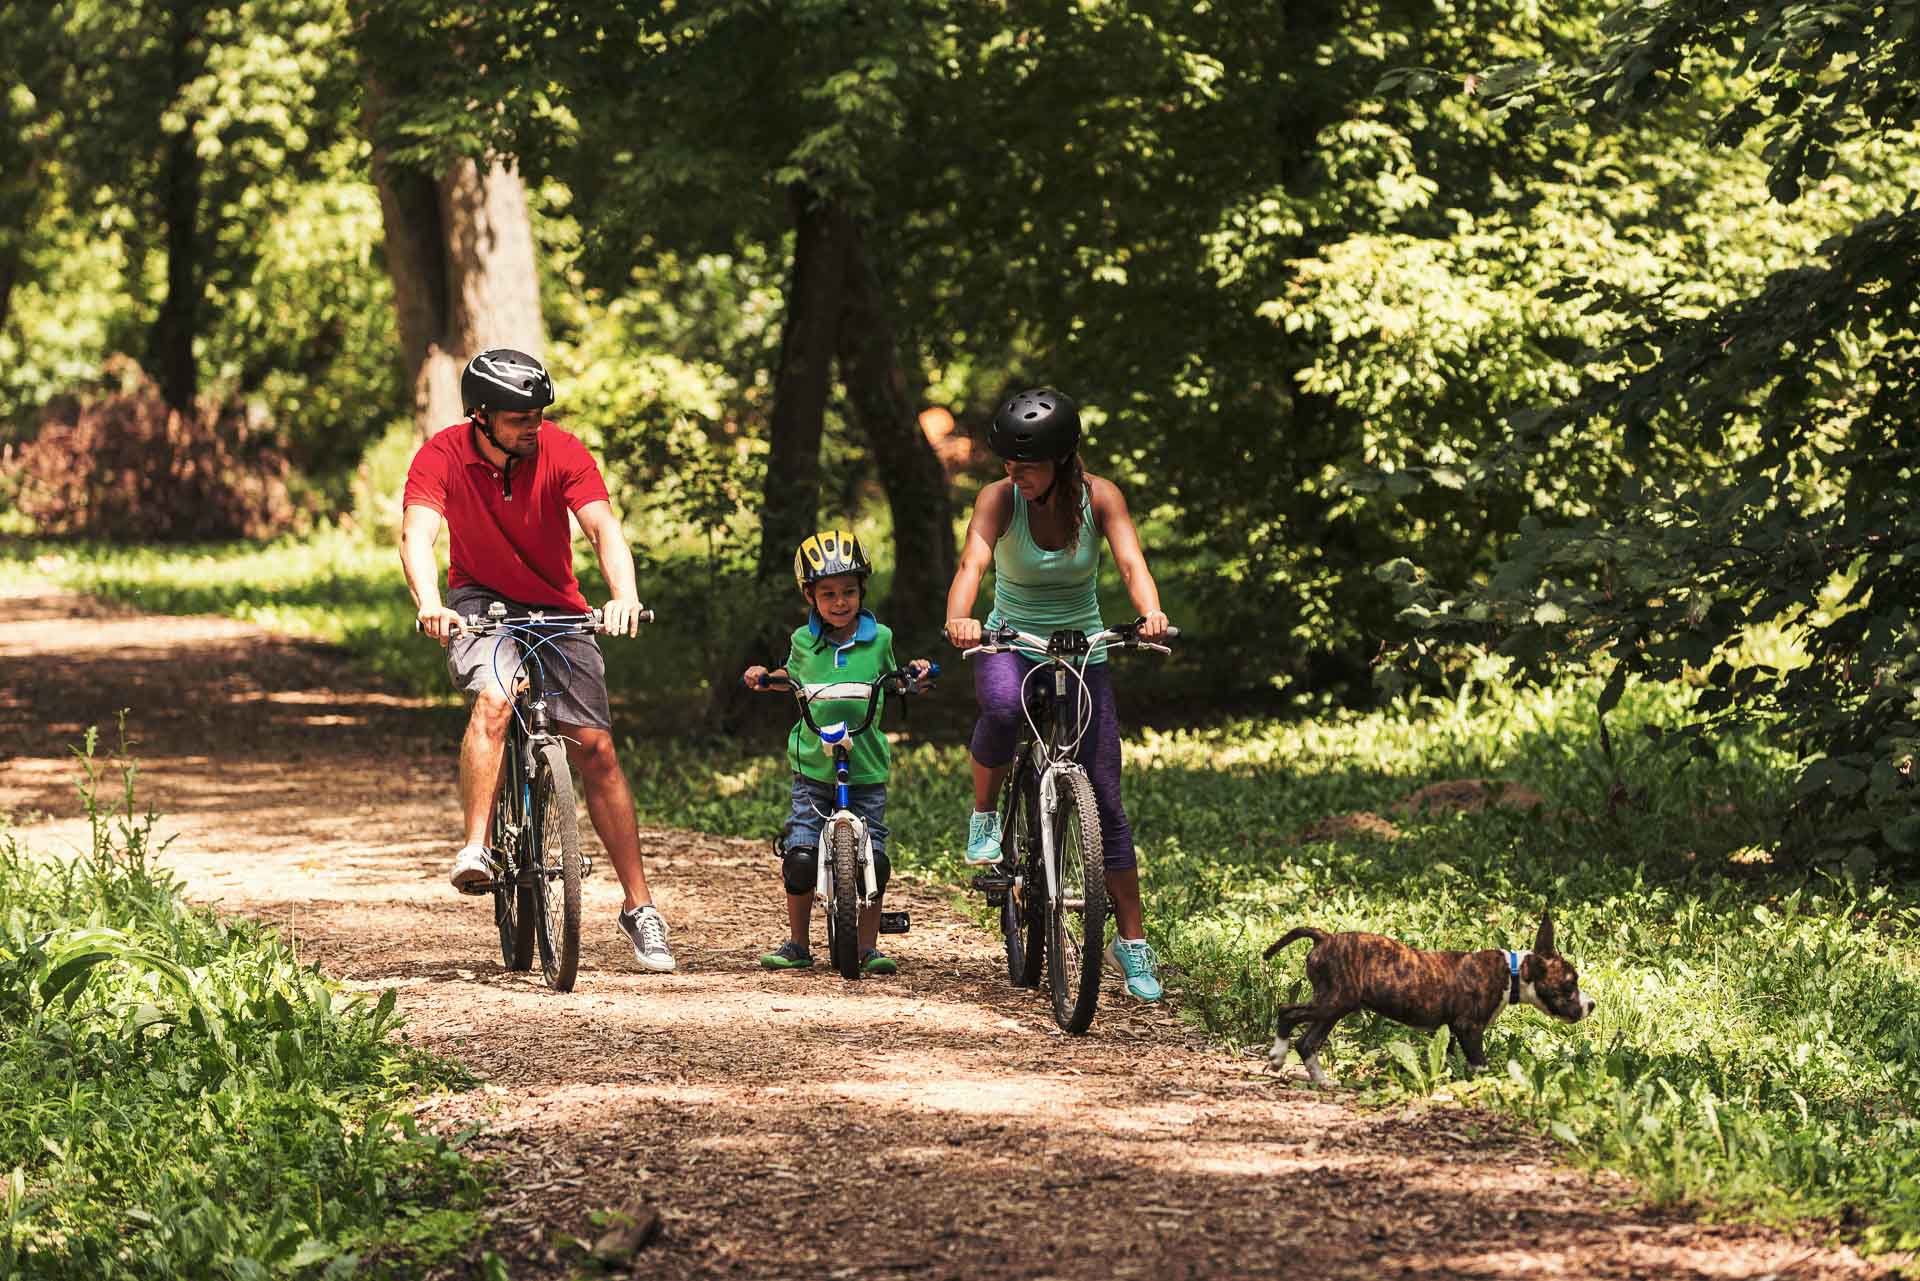 Family biking in forest with dog running next to them